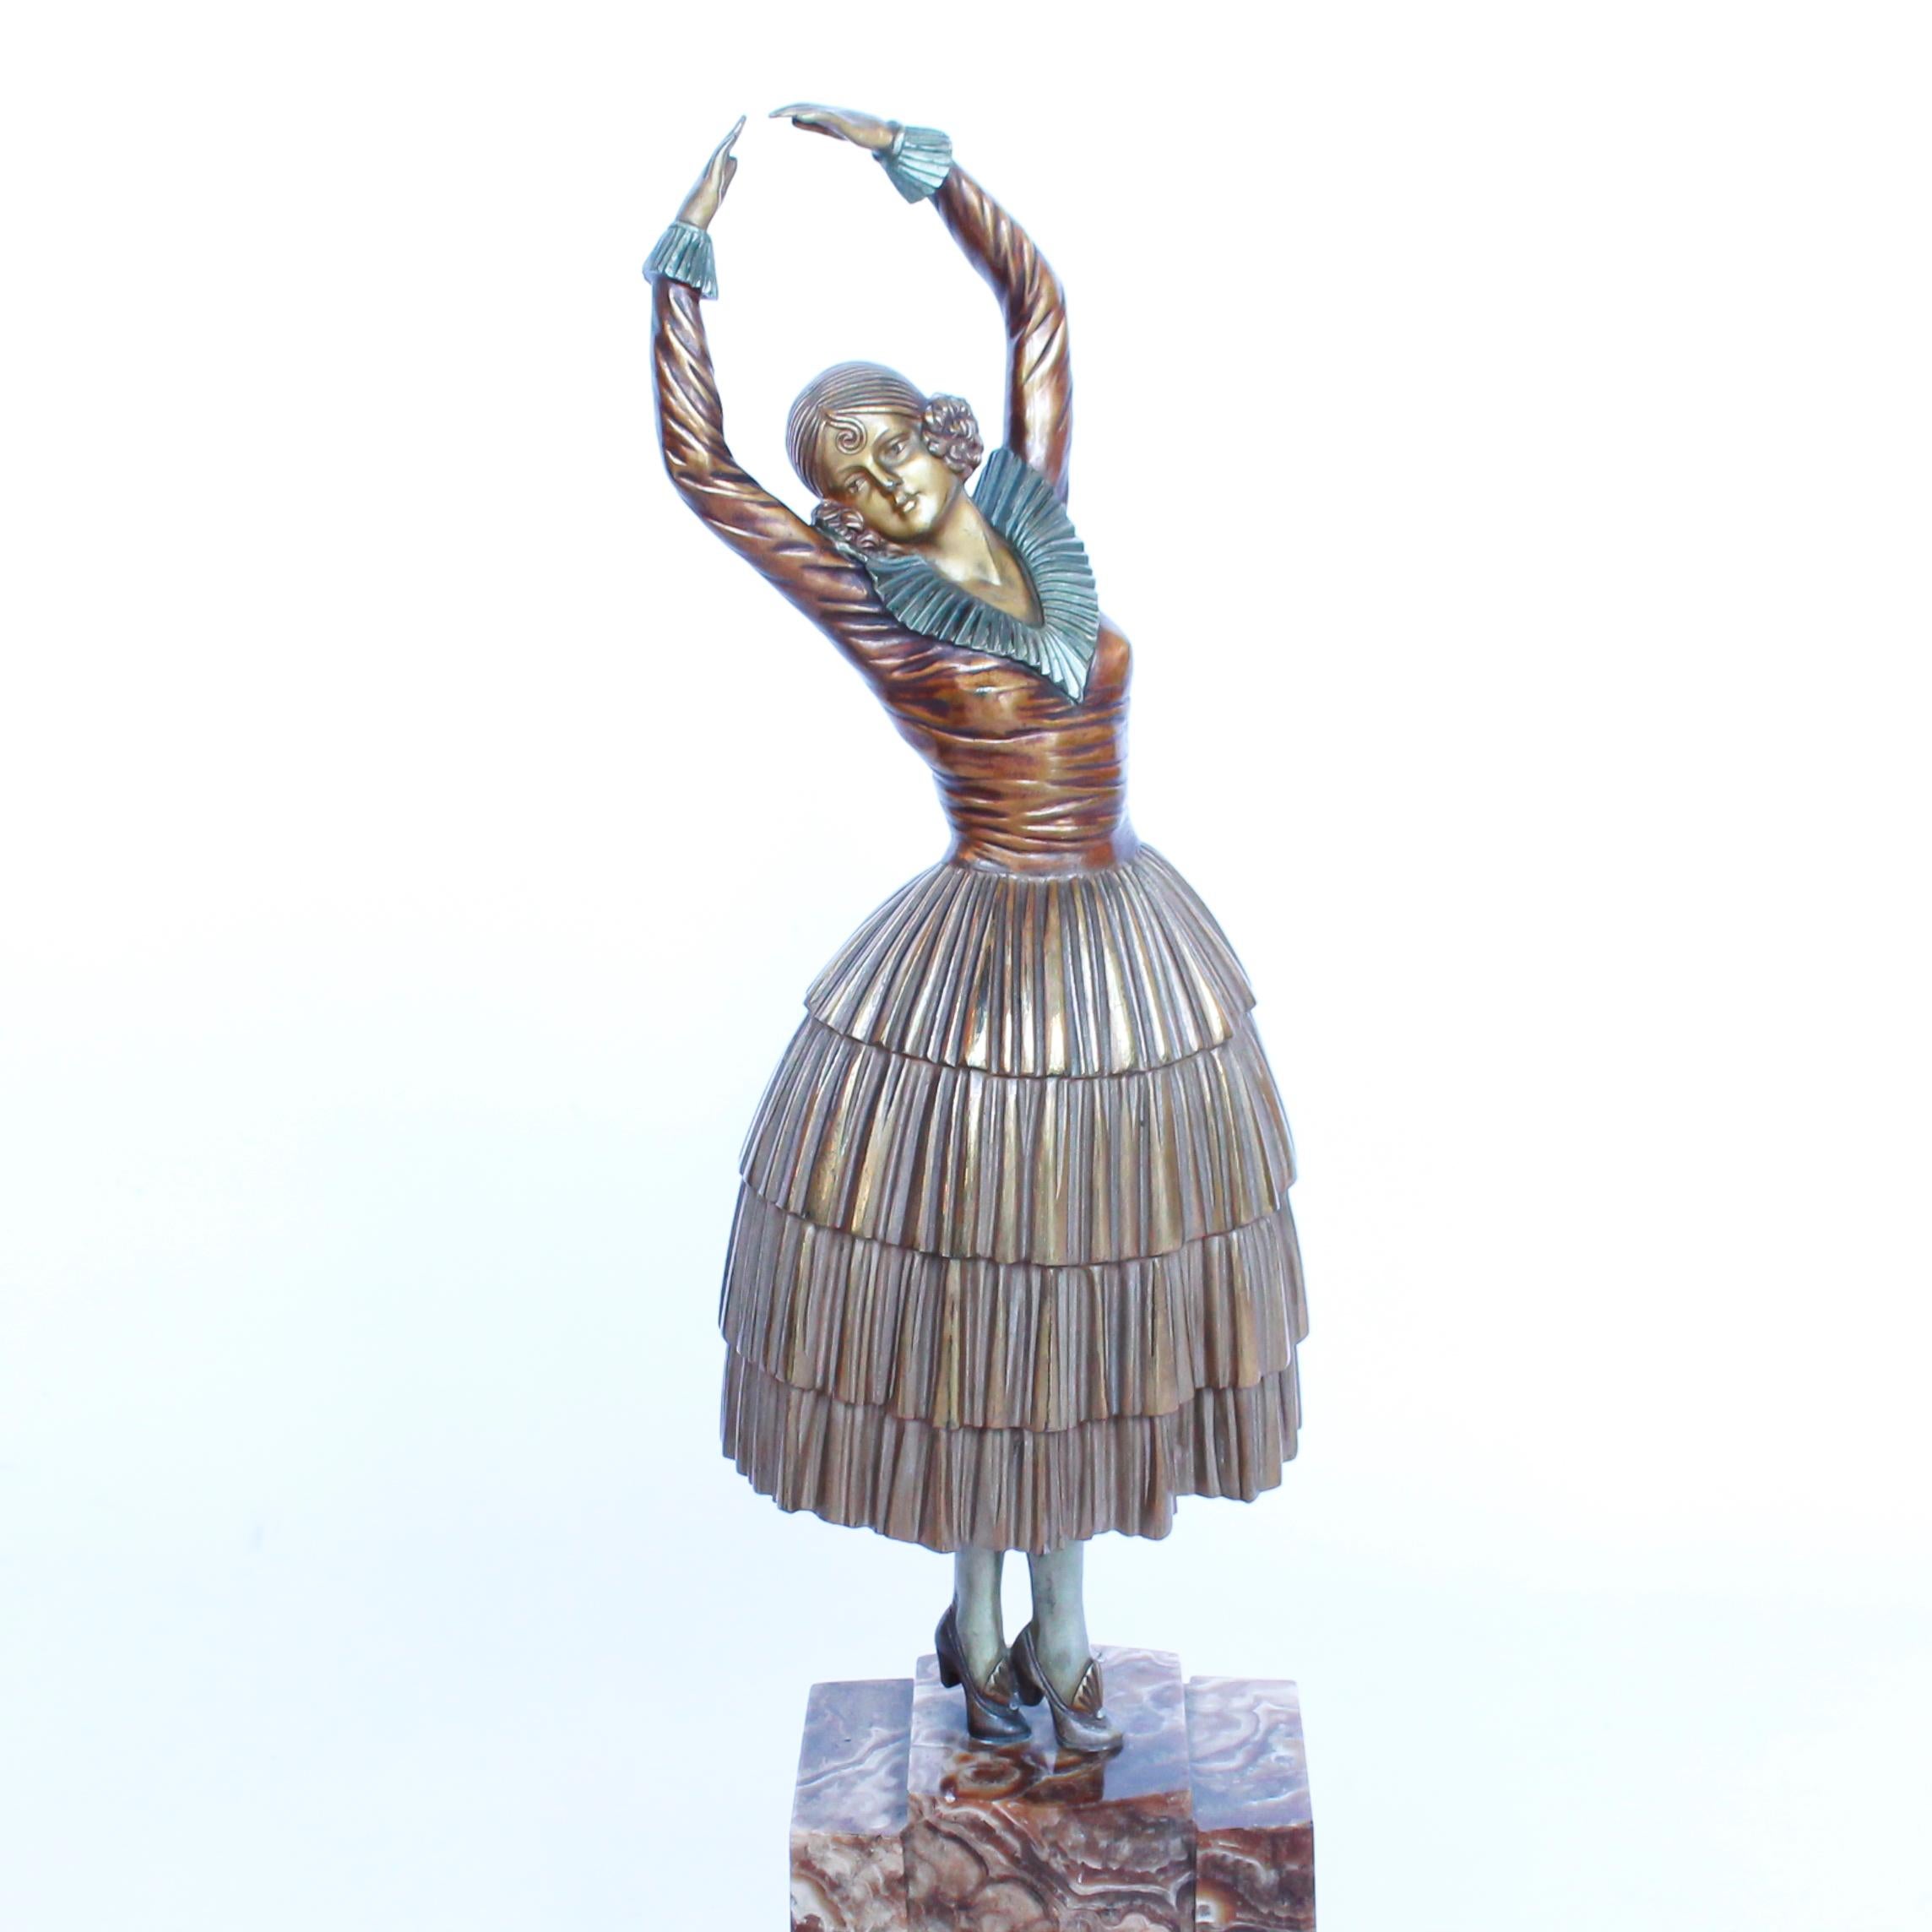 An Art Deco, cold painted gilt and enamel bronze figurine of a dancer wearing period attire, dancing on a brown, onyx stepping plinth. Signed 